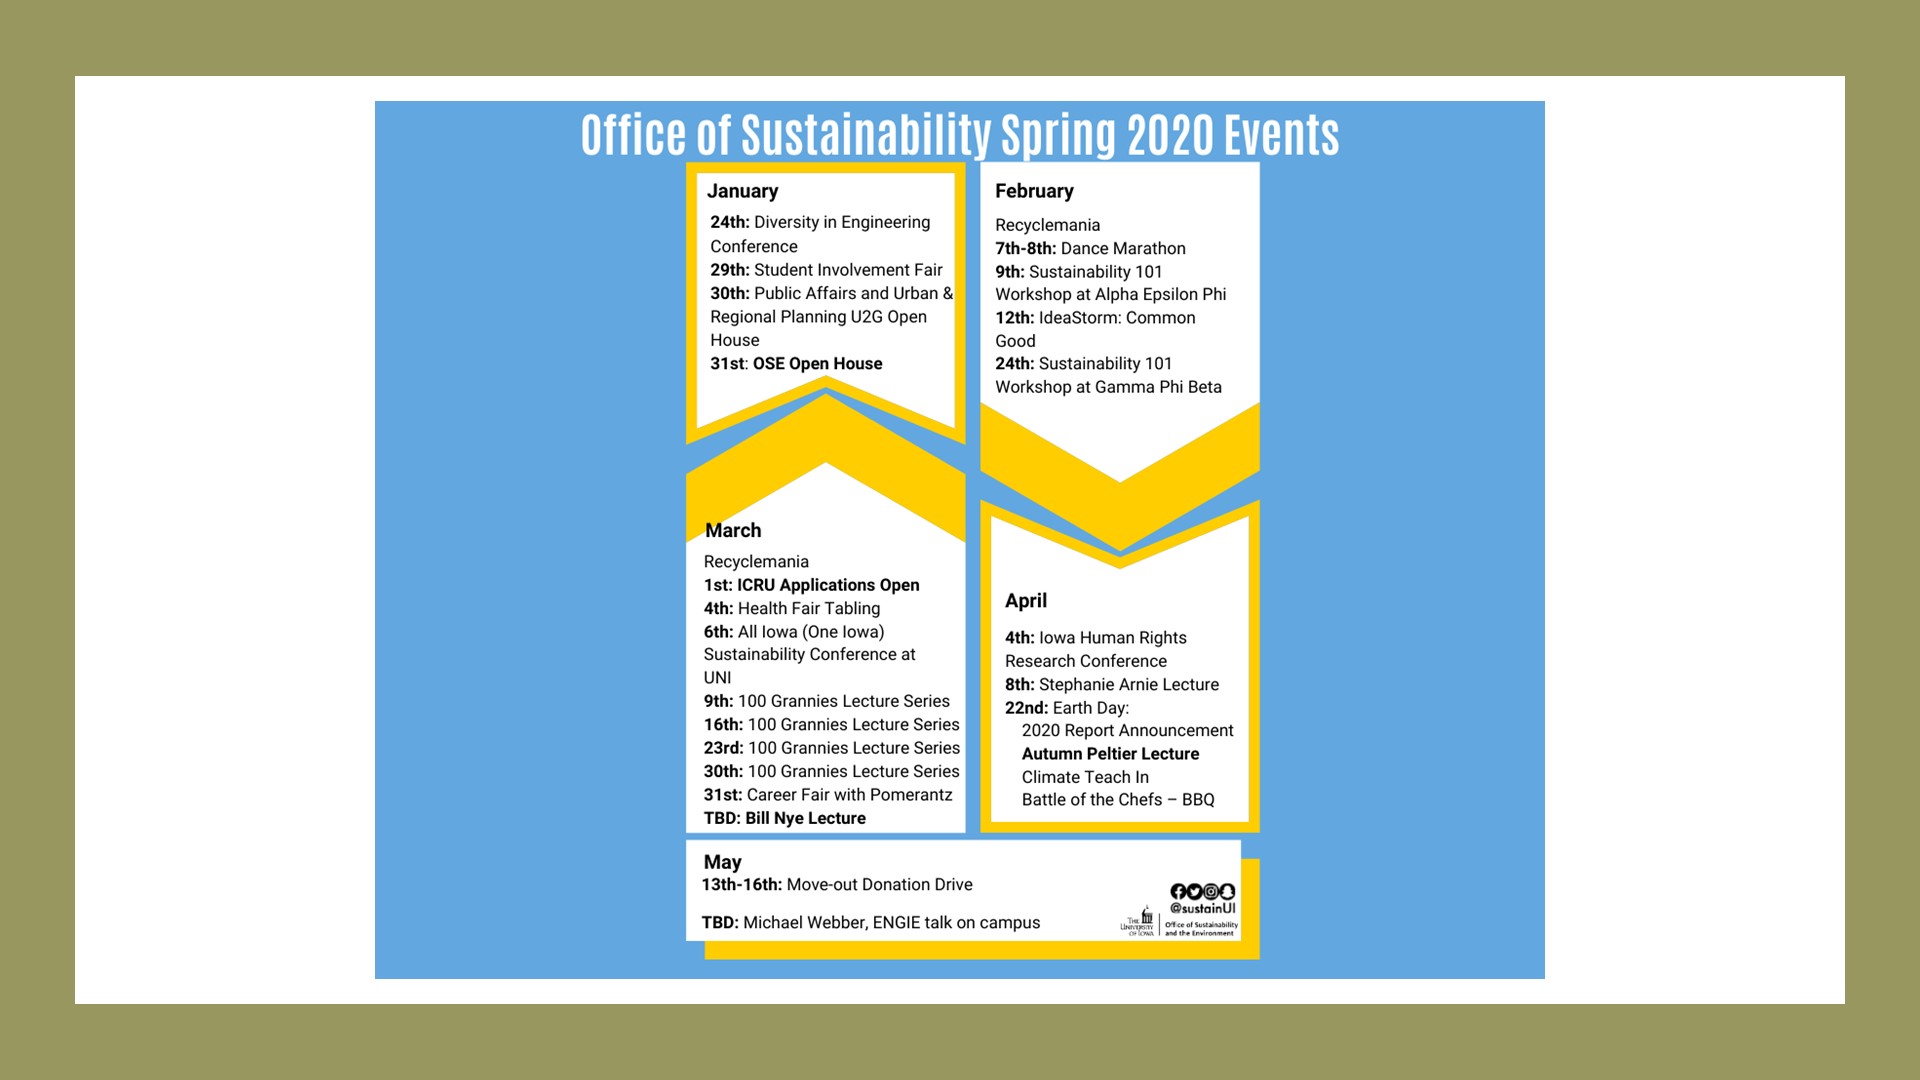 office_of_sustainability_spring_2020_events.jpg